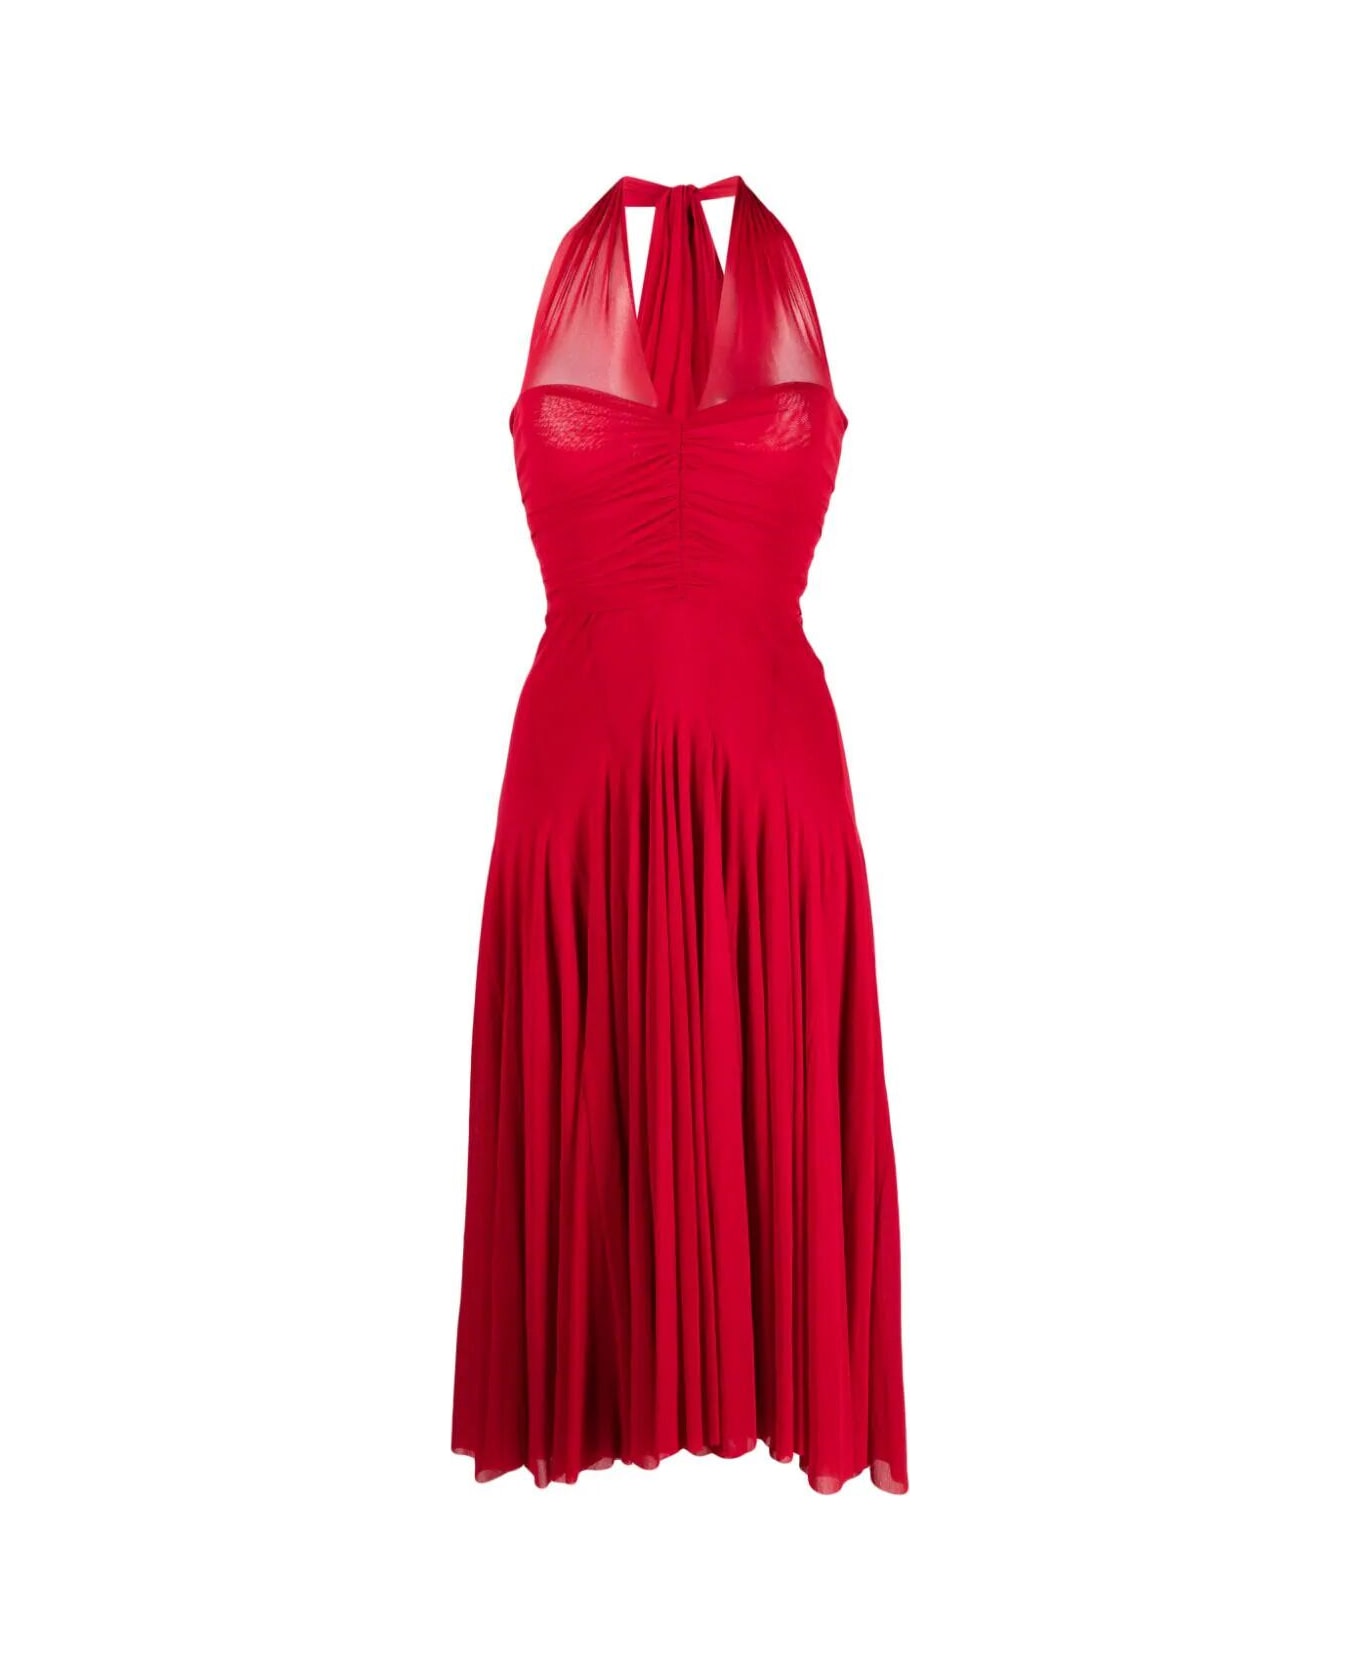 Philosophy di Lorenzo Serafini Short Sleeves Long Dress With Tulle And Naked Shoulder - Red